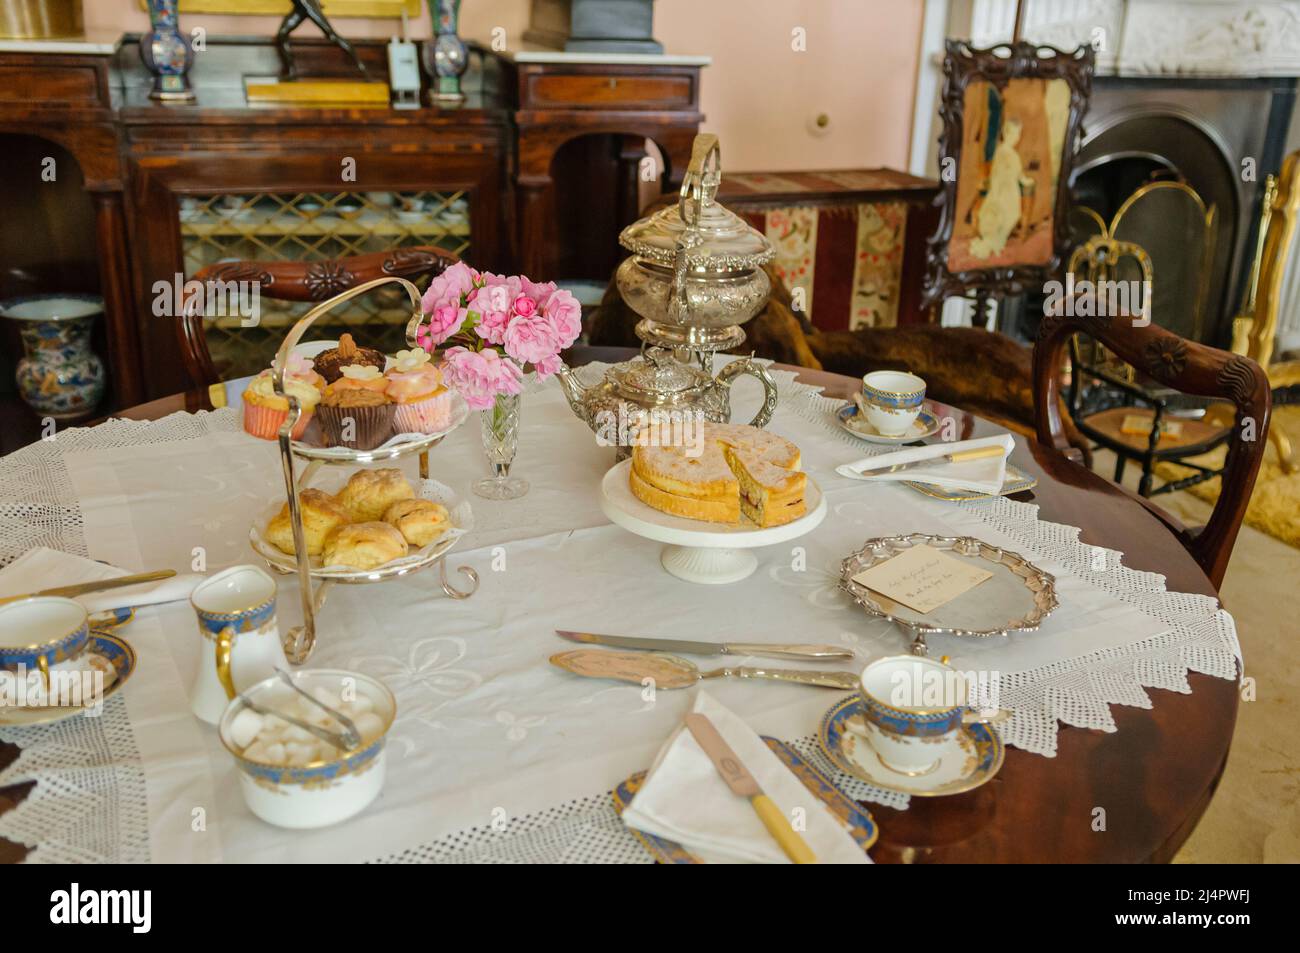 Formal table set for afternoon tea in a British stately home. Stock Photo